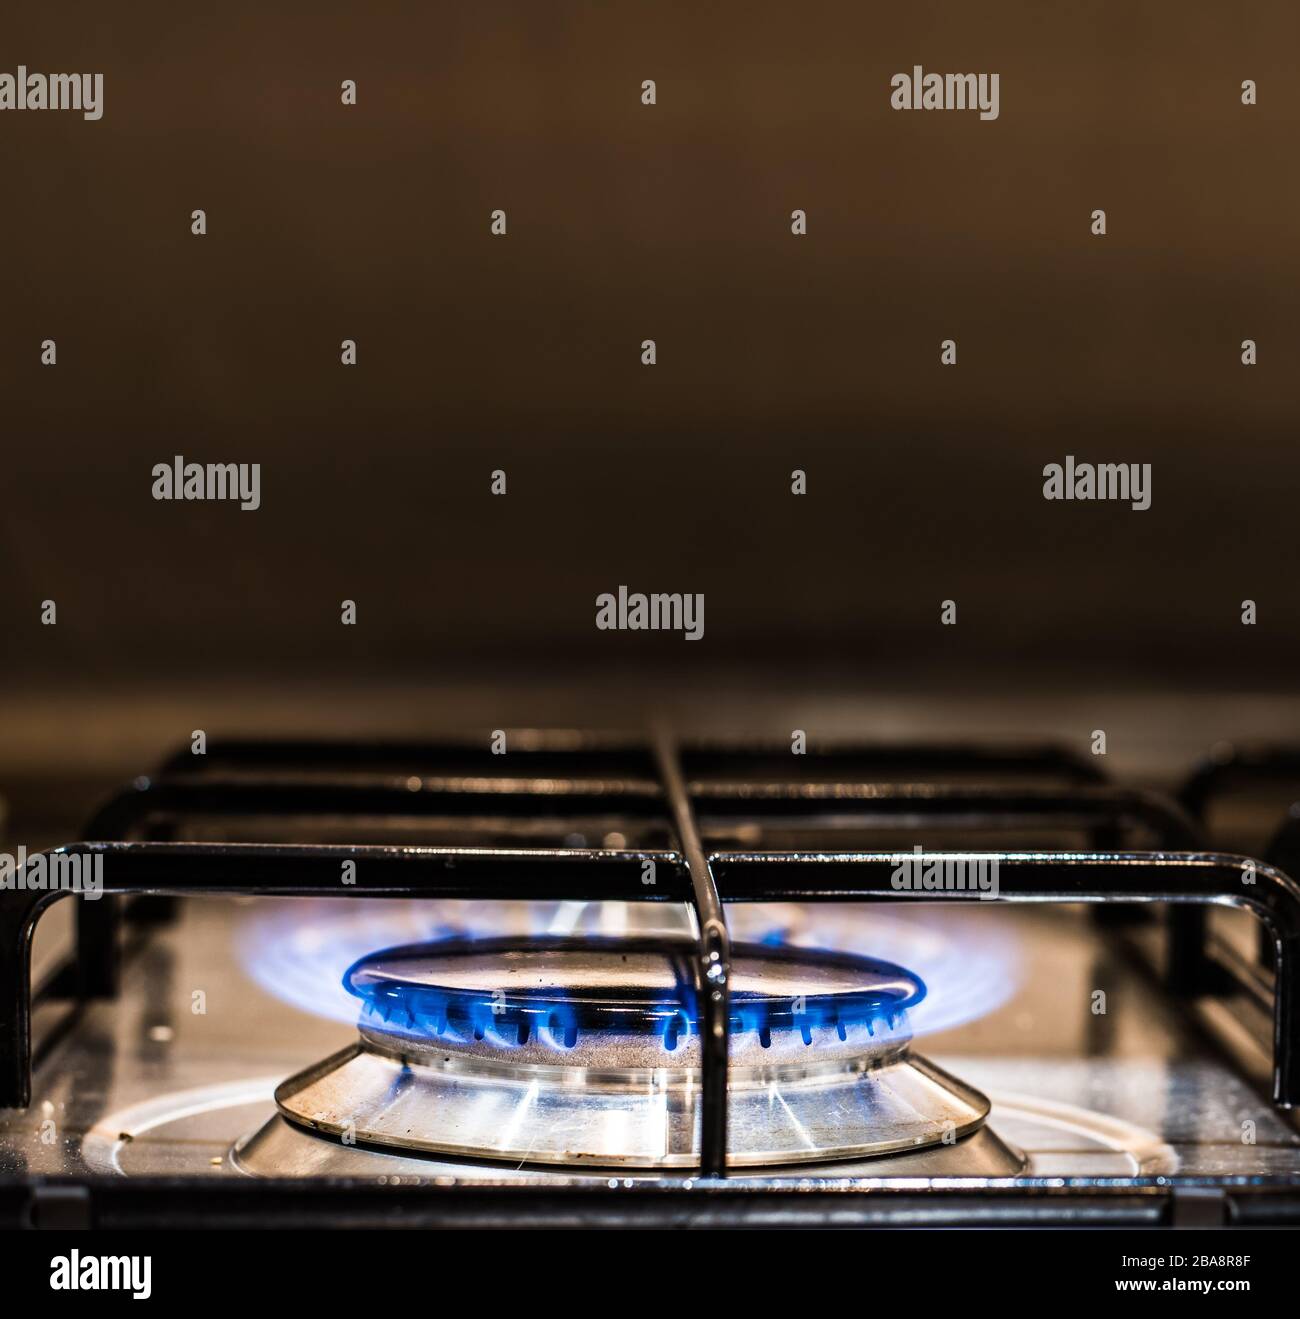 Gas hob in a modern kitchen Stock Photo